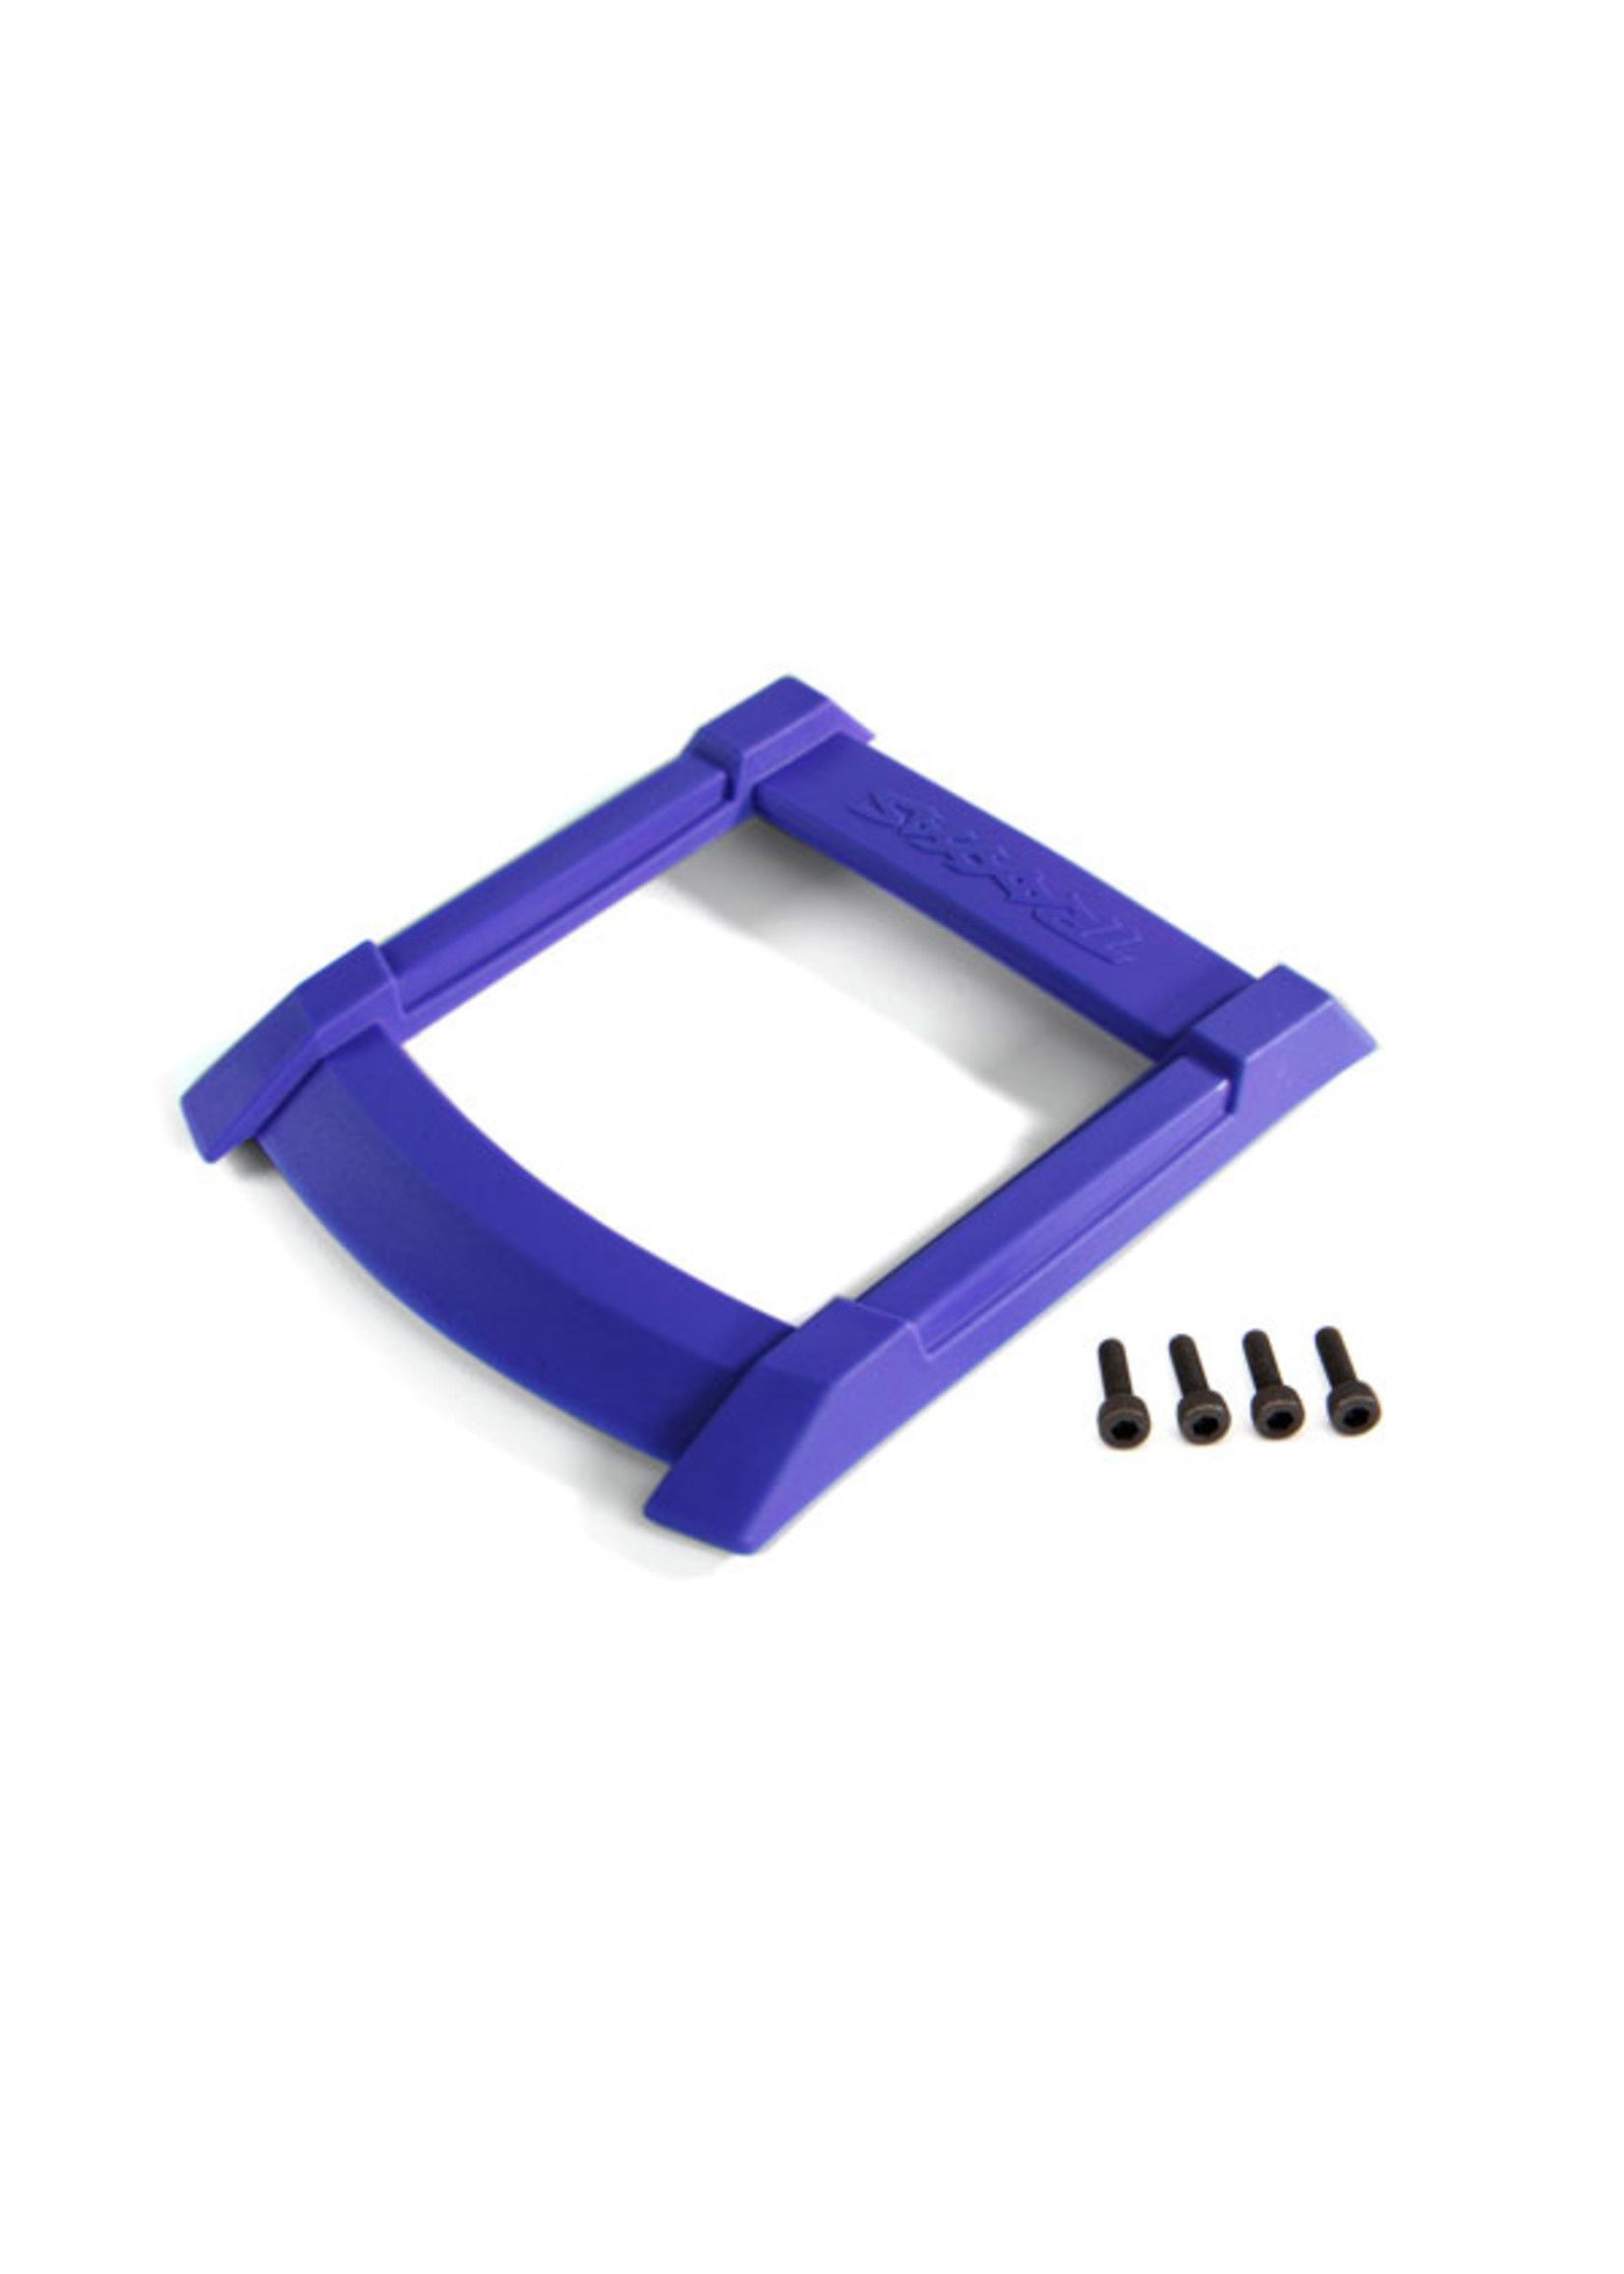 Traxxas 8917X - Skid Plate Roof for Maxx - Blue